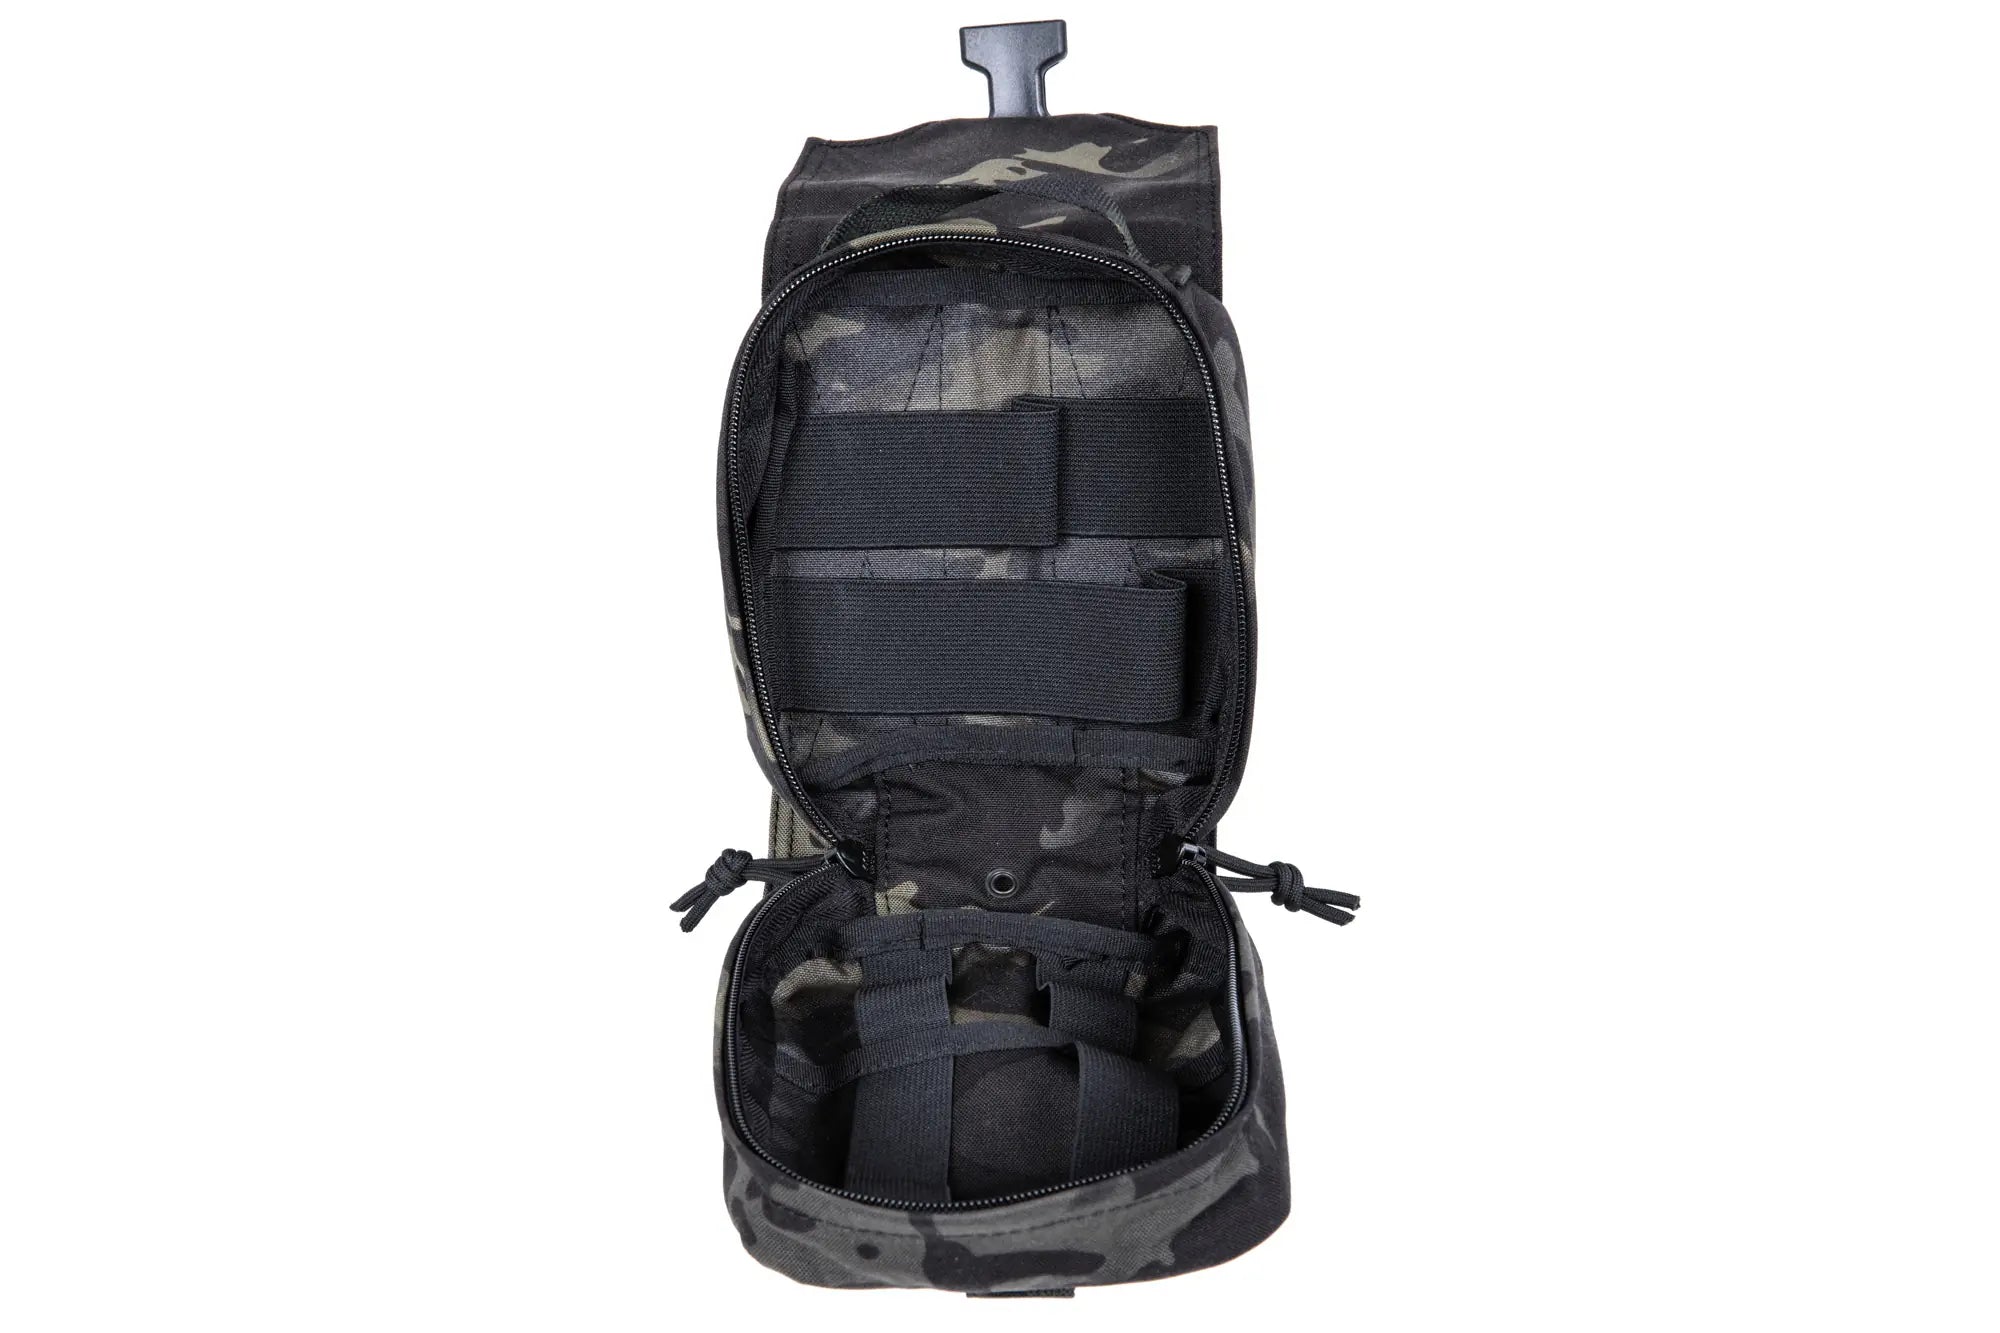 First aid kit with Molle panel Wosport Multicam Black